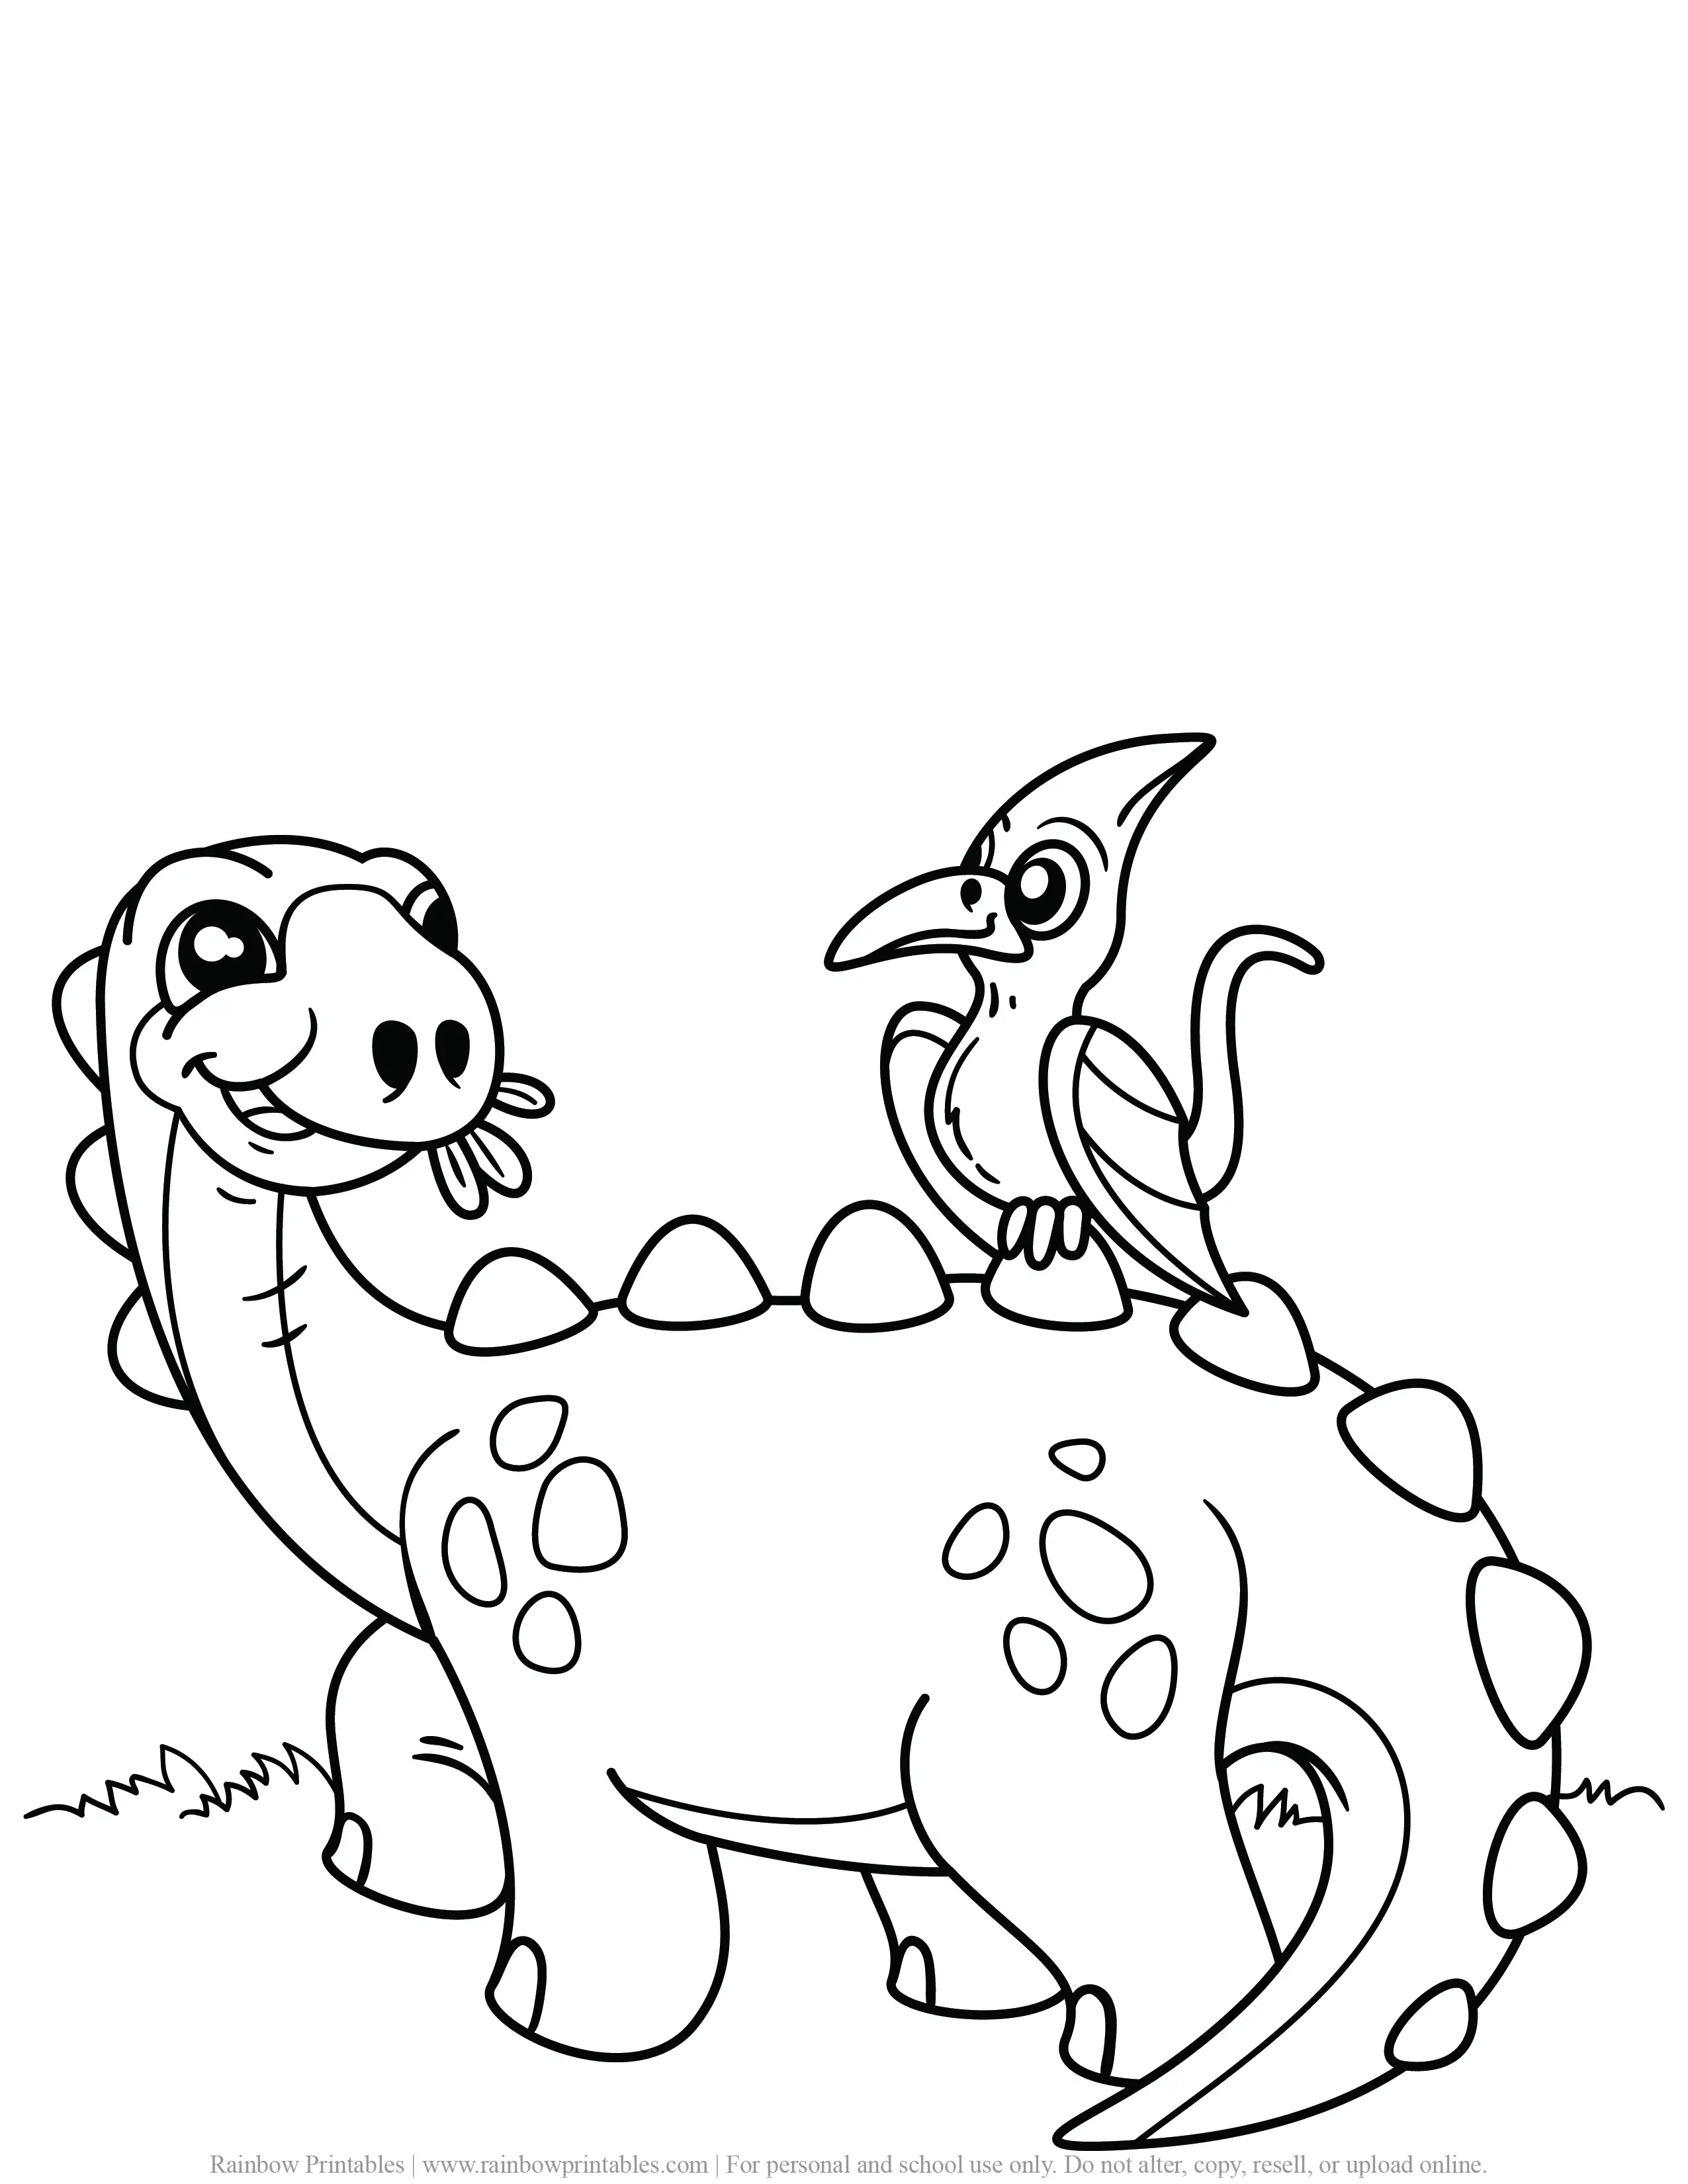 20 FREE Super Cute Dinosaur Coloring Pages For Kids   Rainbow ...